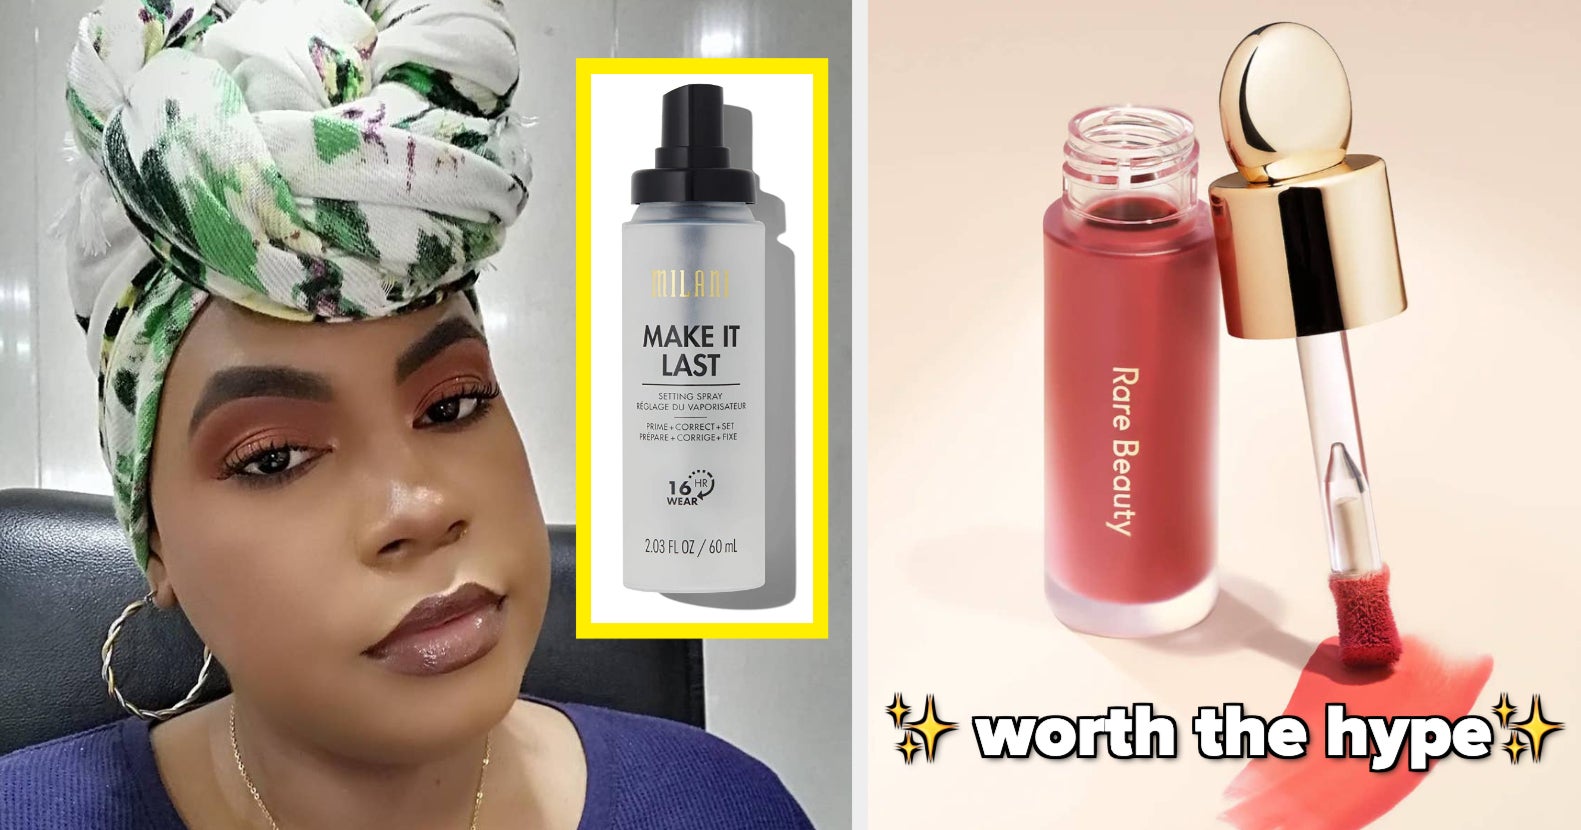 Viral TikTok Beauty Products That Actually Work